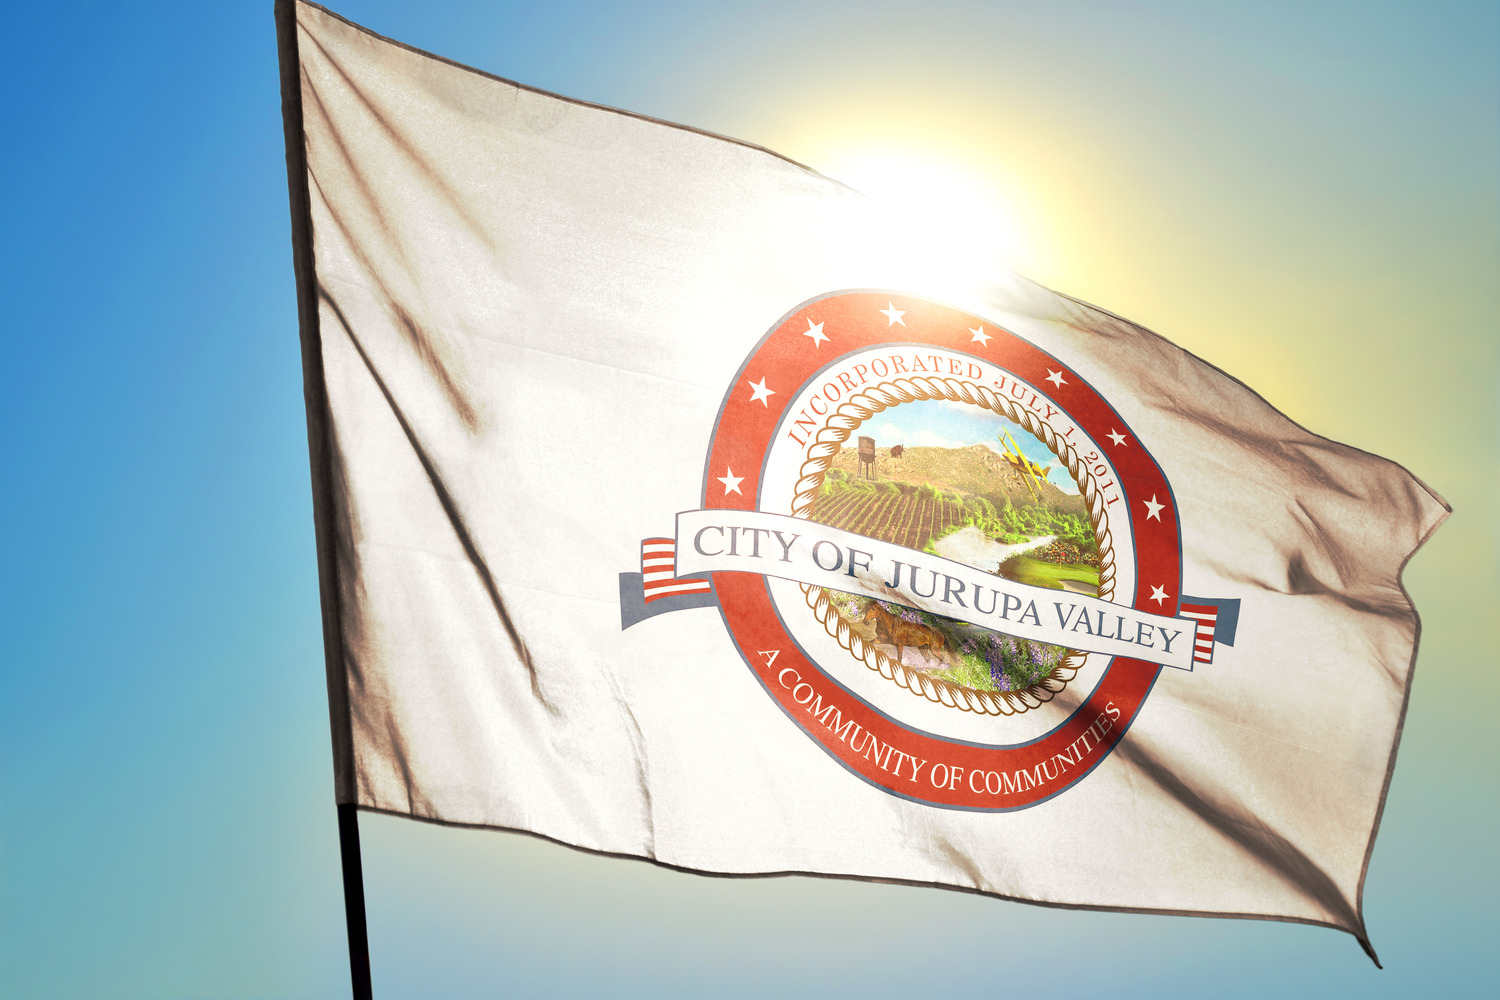 Flag of Jurupa Valley waving in the sunlight, featuring the city's seal with a landscape and text.